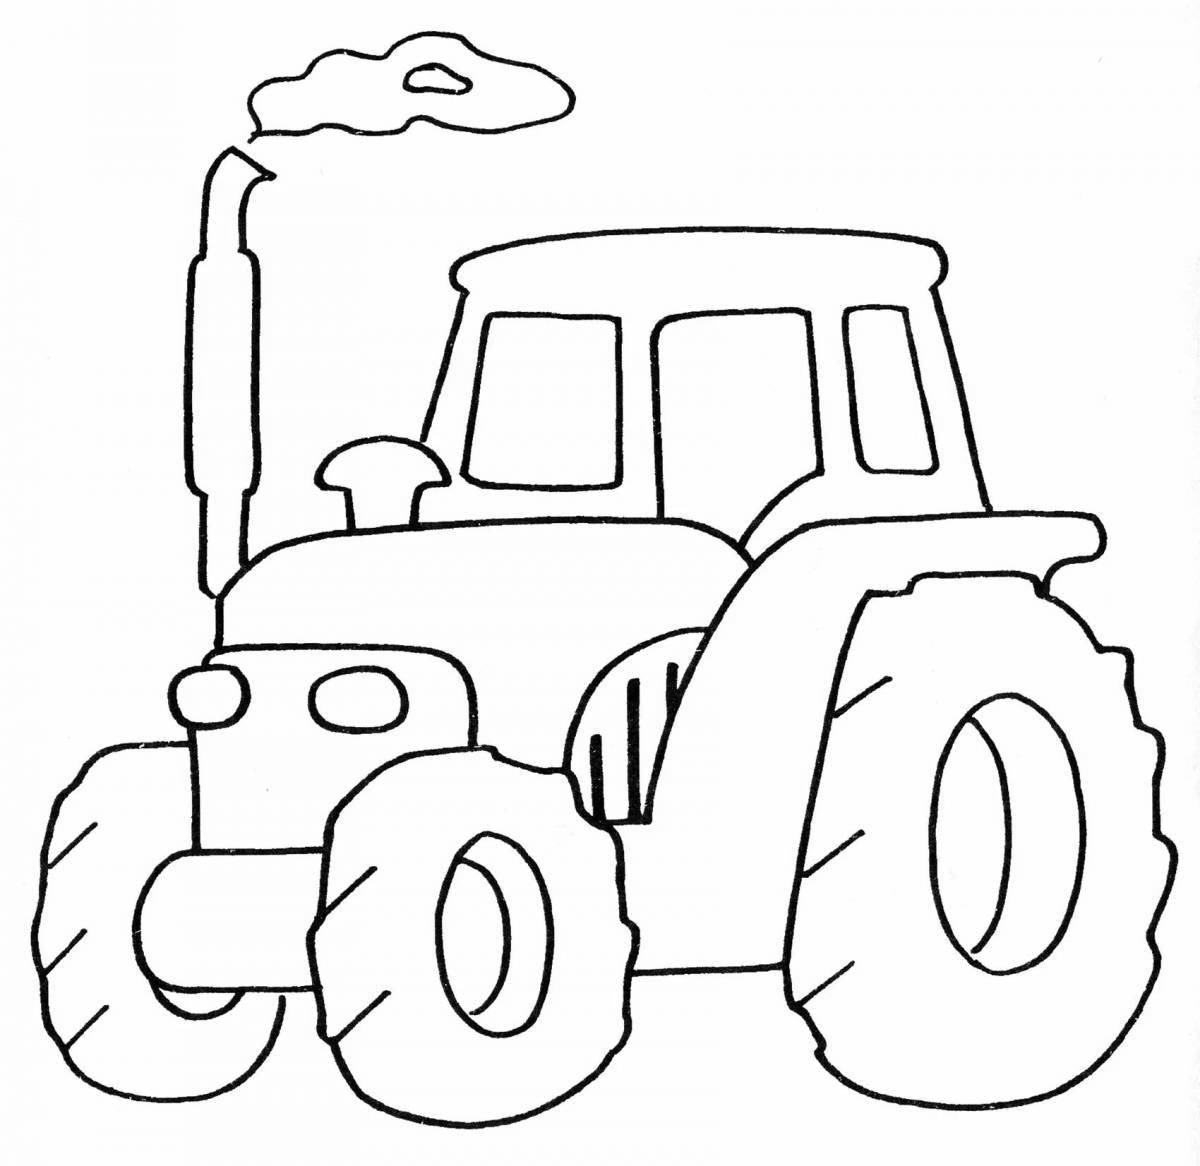 Dazzling blue pre-k tractor coloring page